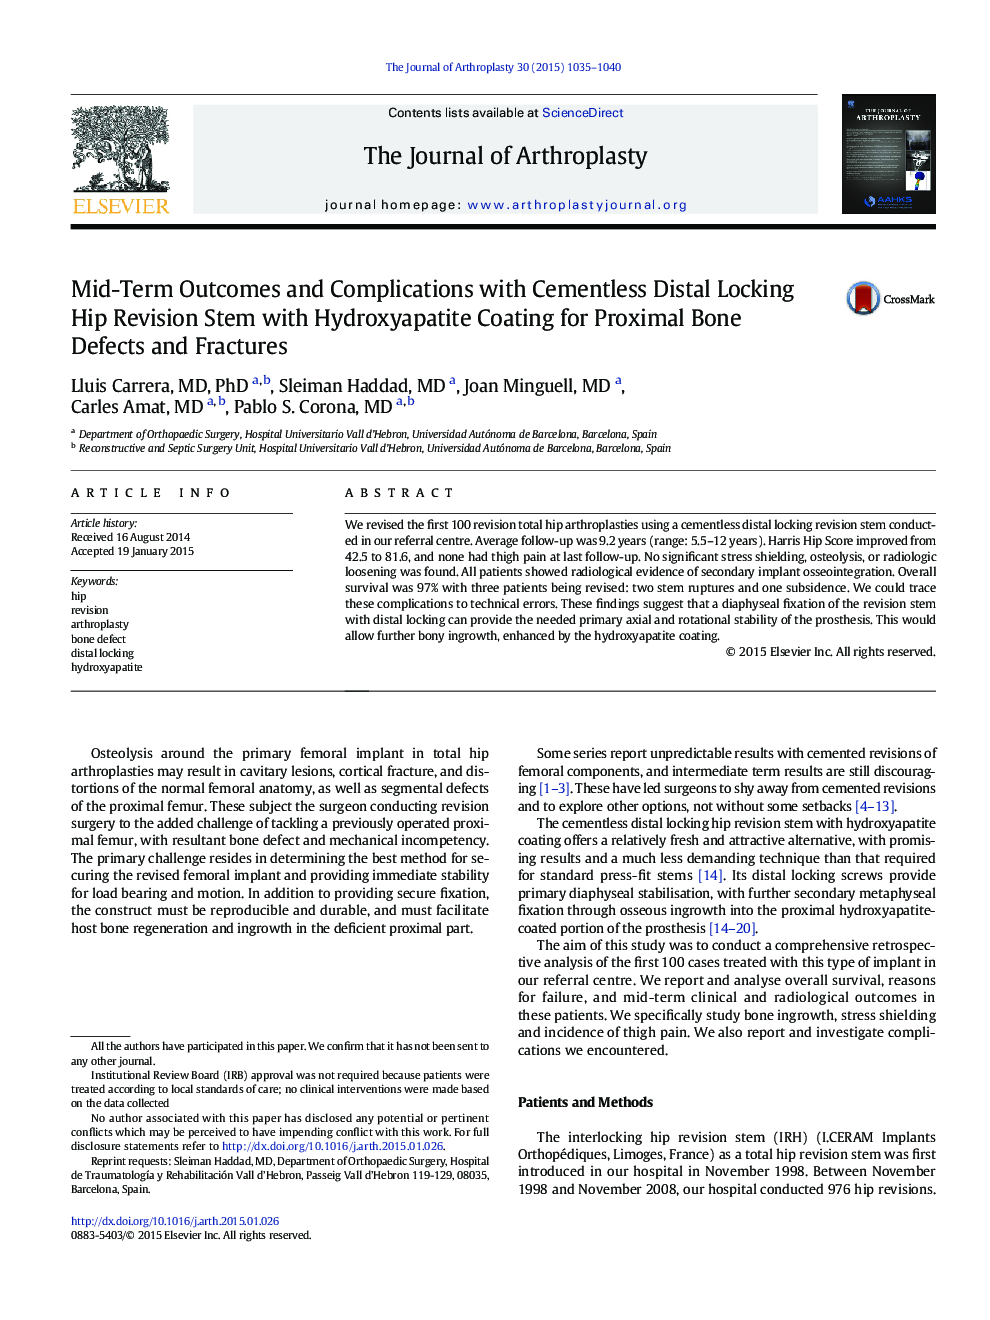 Mid-Term Outcomes and Complications with Cementless Distal Locking Hip Revision Stem with Hydroxyapatite Coating for Proximal Bone Defects and Fractures